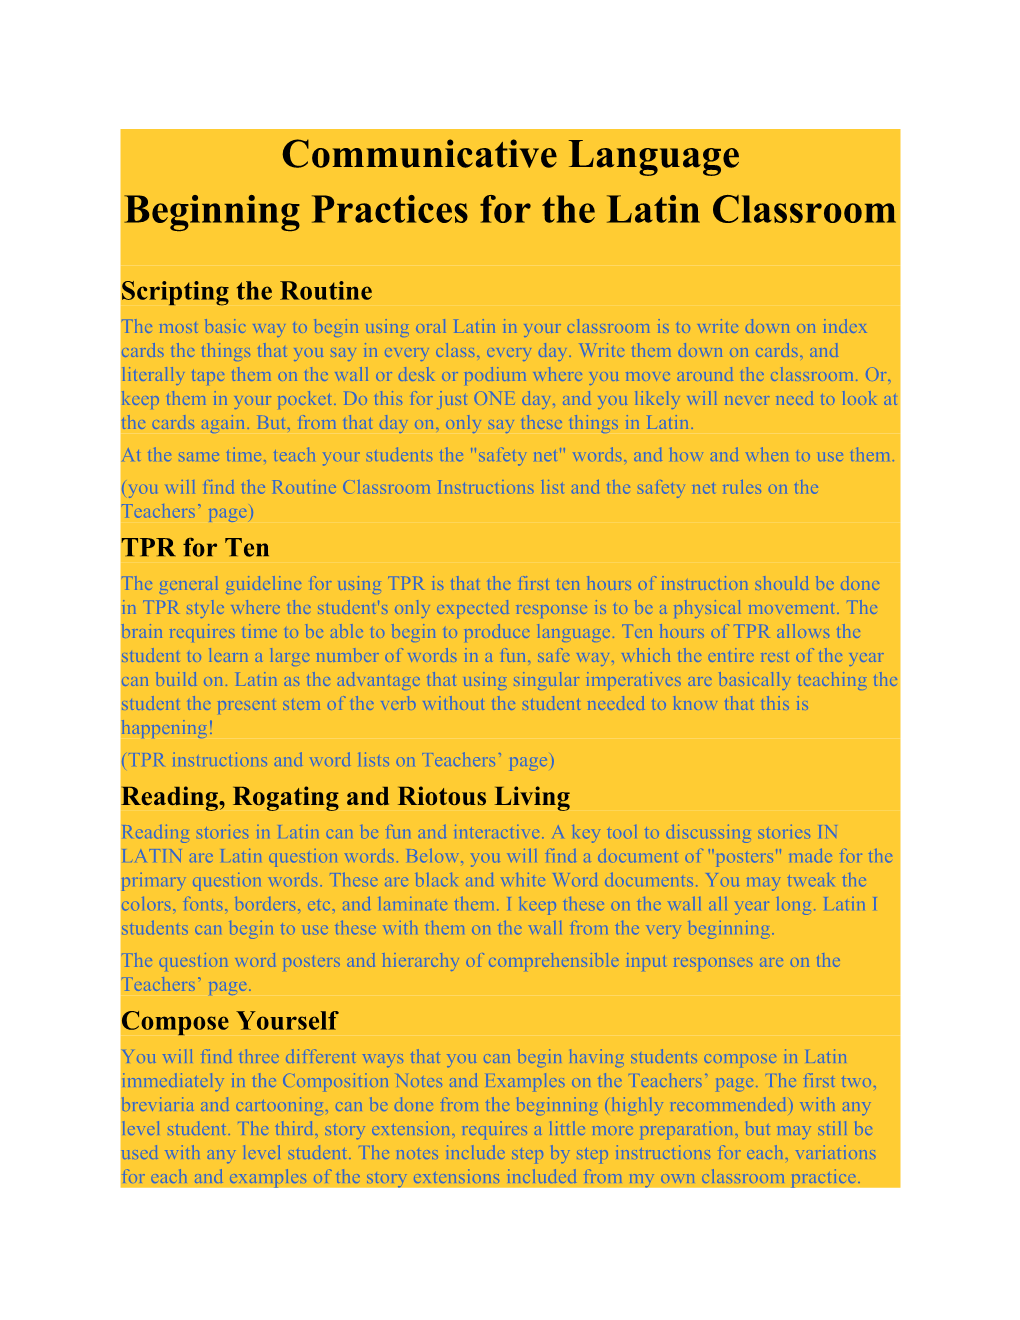 Beginning Practices for the Latin Classroom